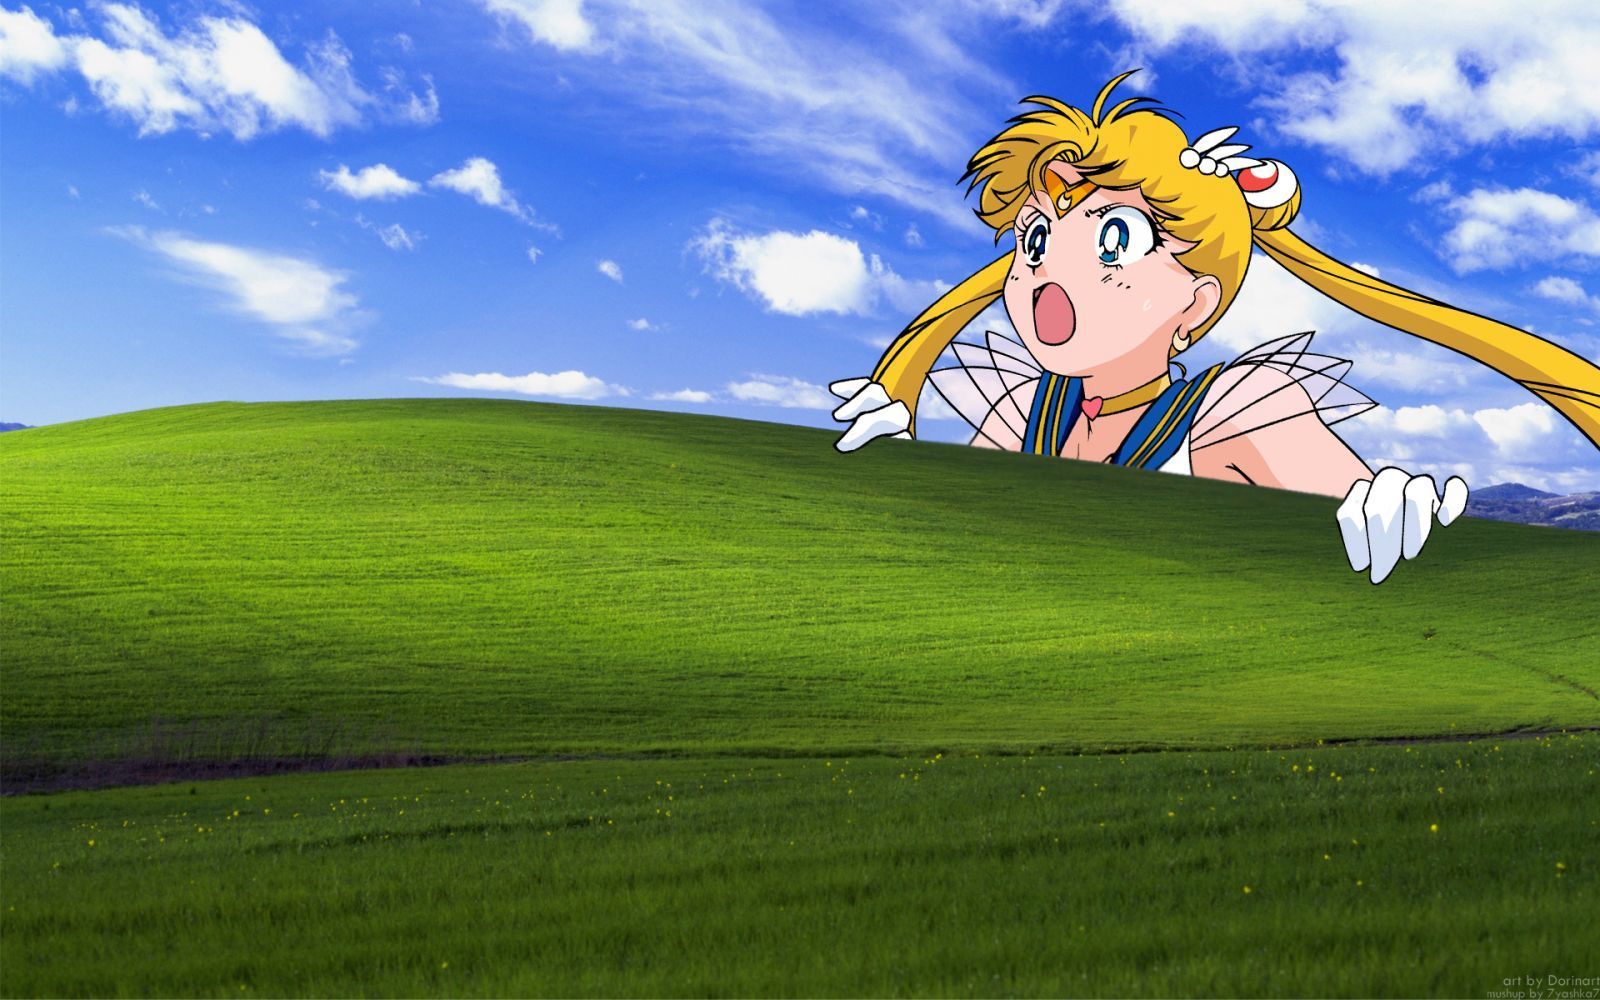 Sailor moon in the middle of a field - Sailor Moon